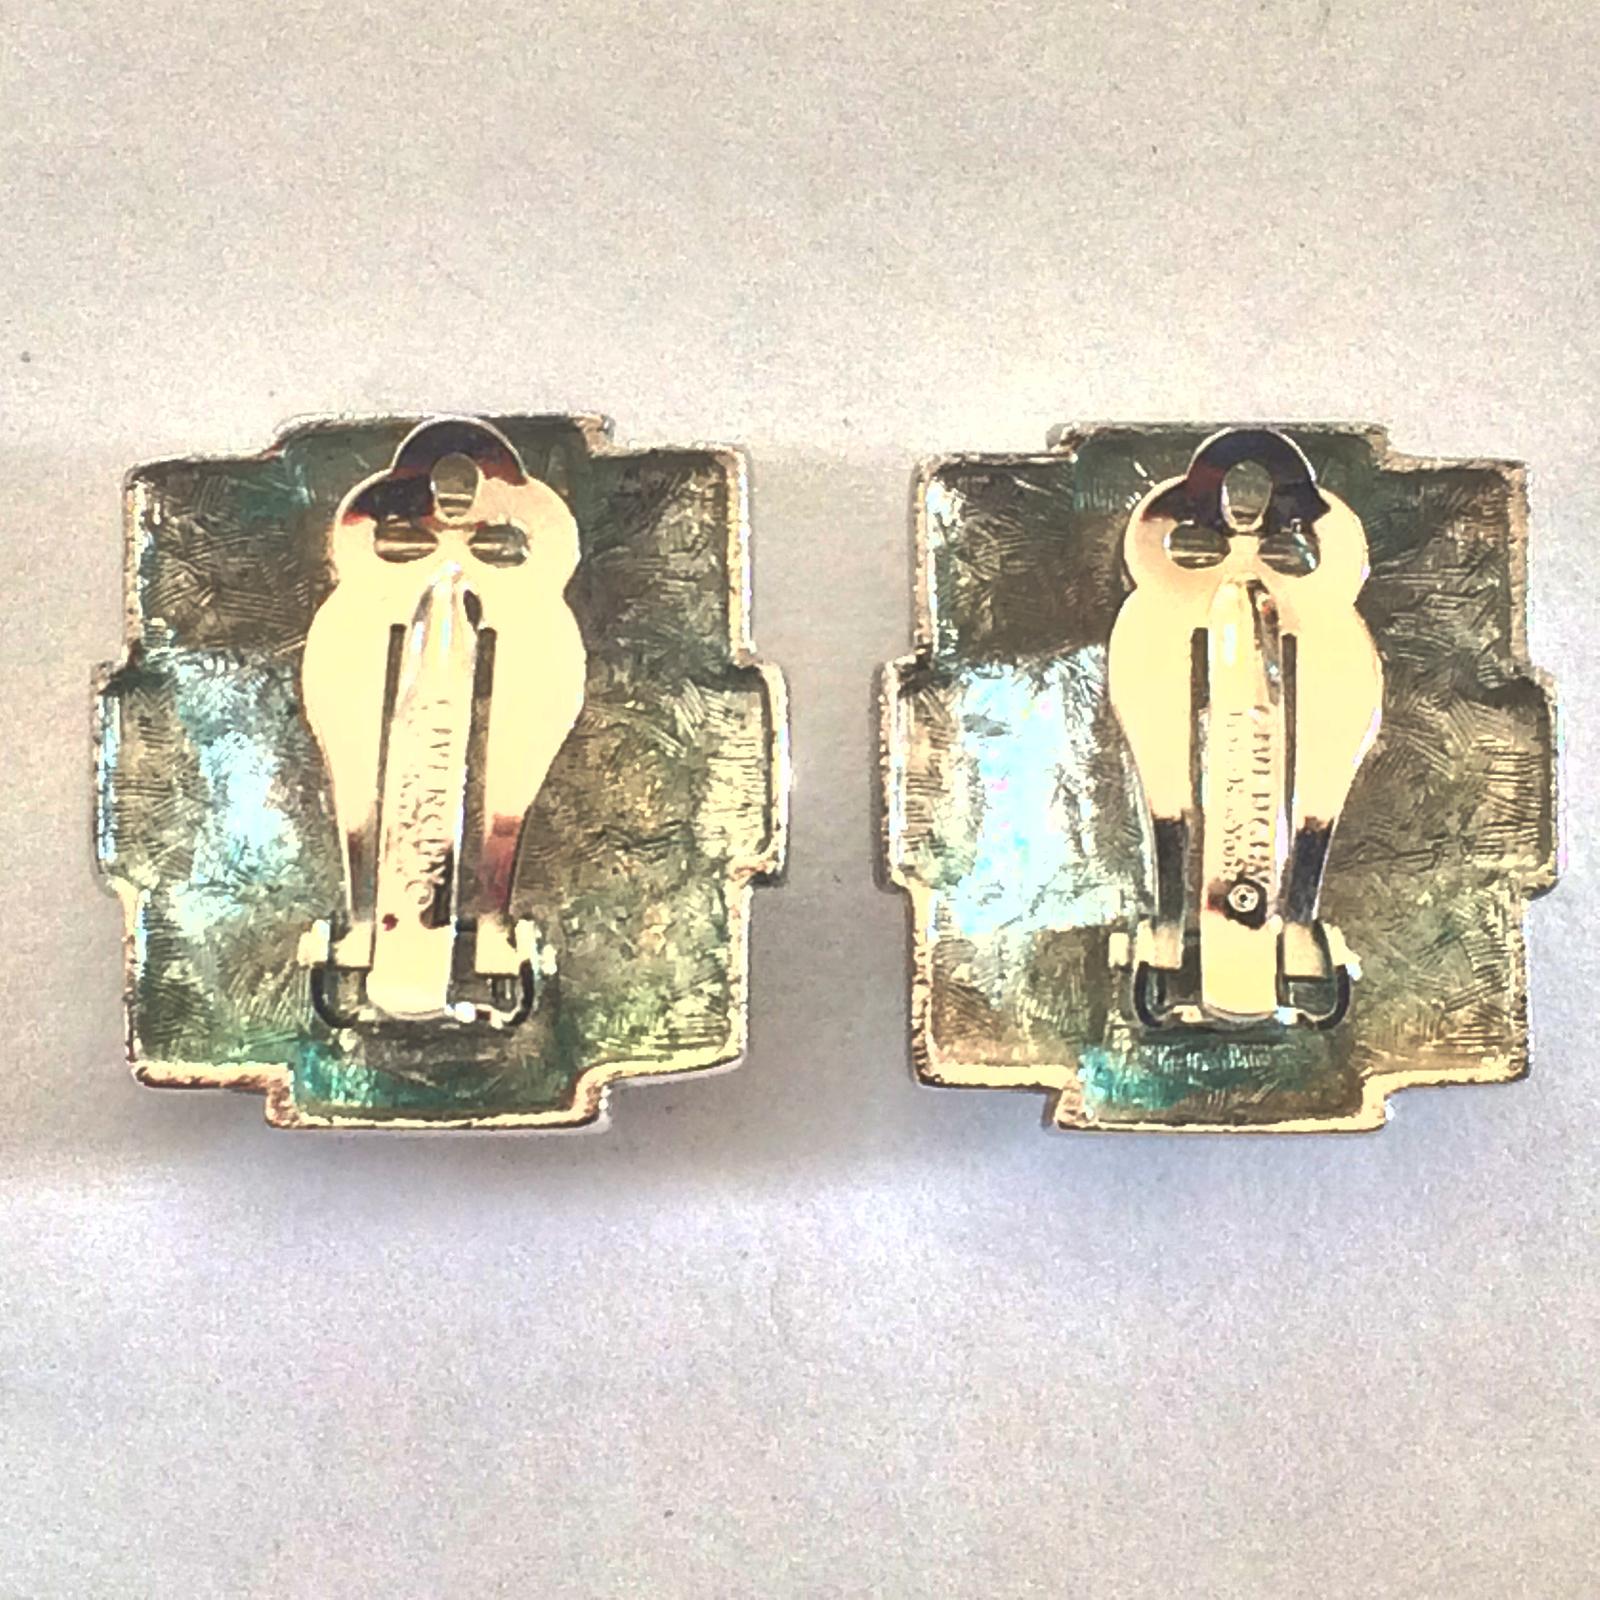 Women's Art Deco Revival Clip earrings by Givenchy